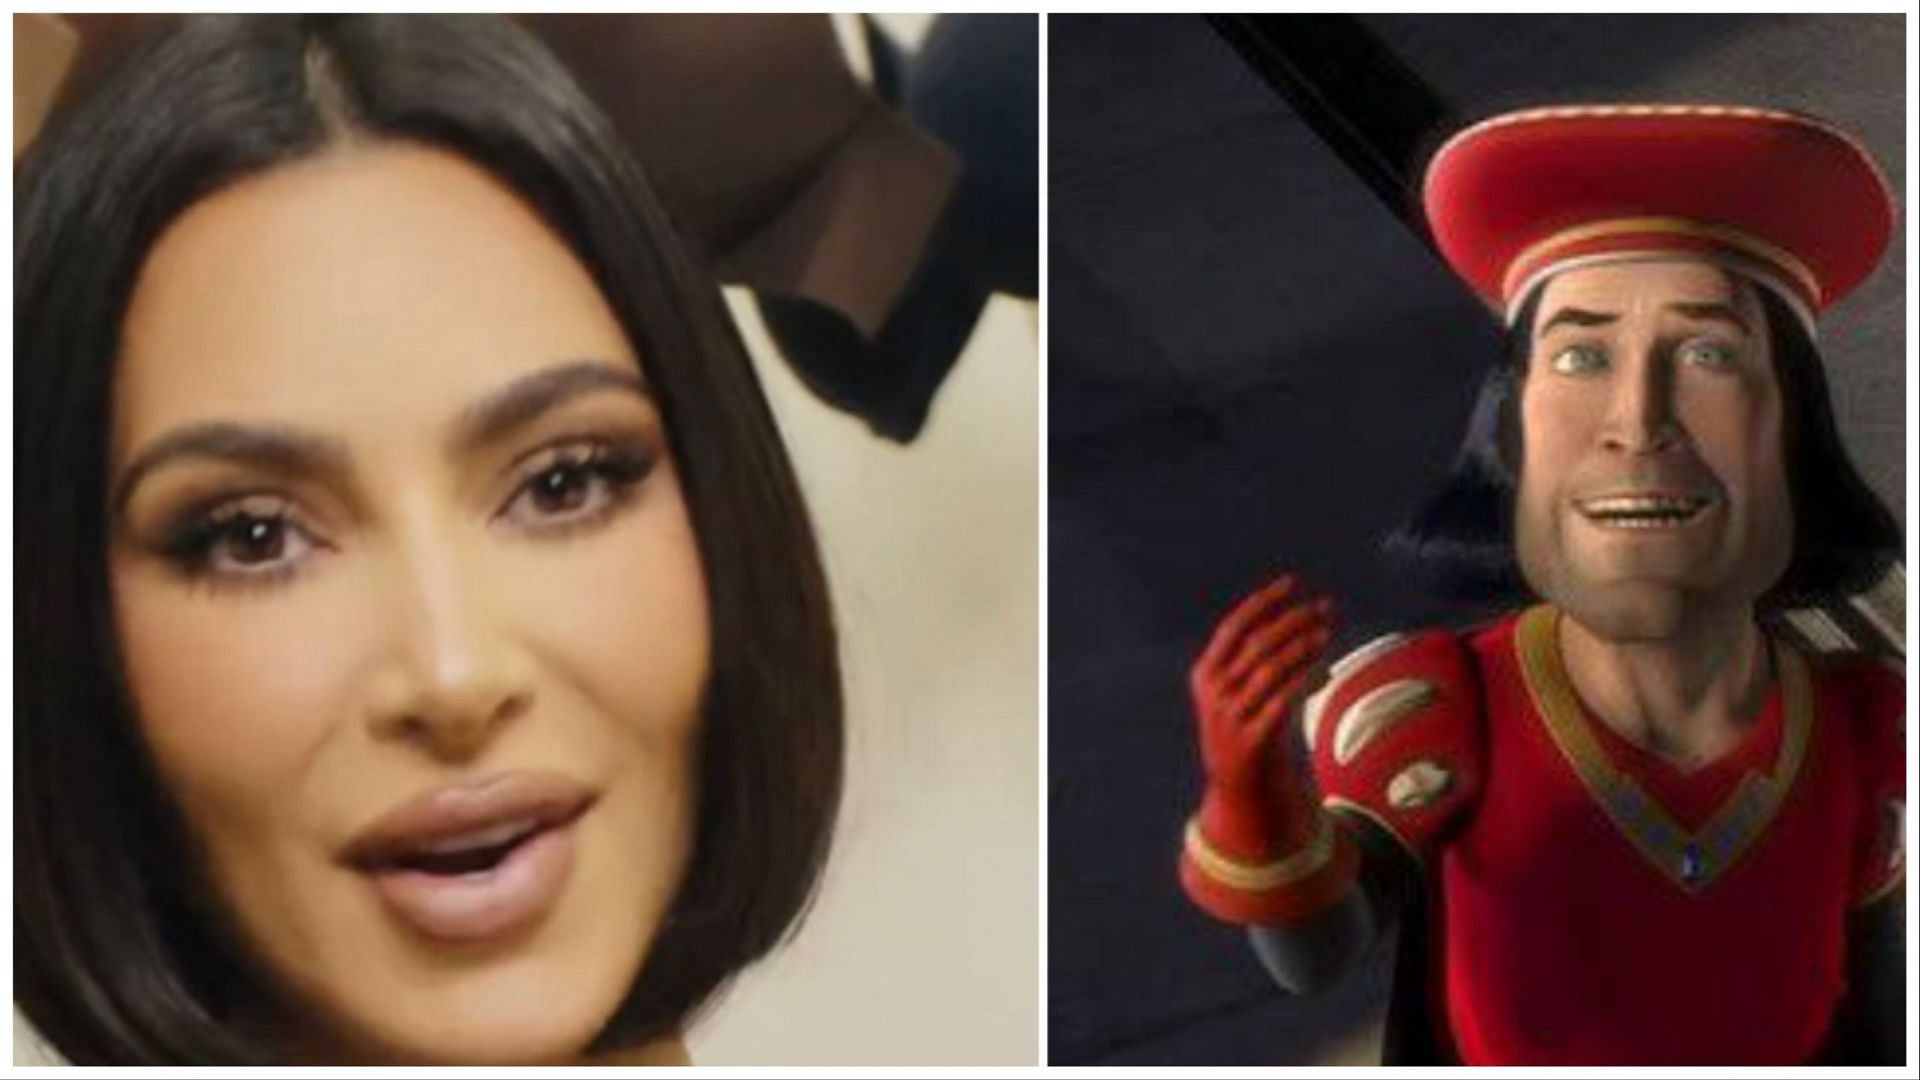 Social media users troll Kim Kardashian after the celebrity was seen sporting a new haircut: Netizens compared her to Shrek villain Lord Farquaad. (Image via Twitter)